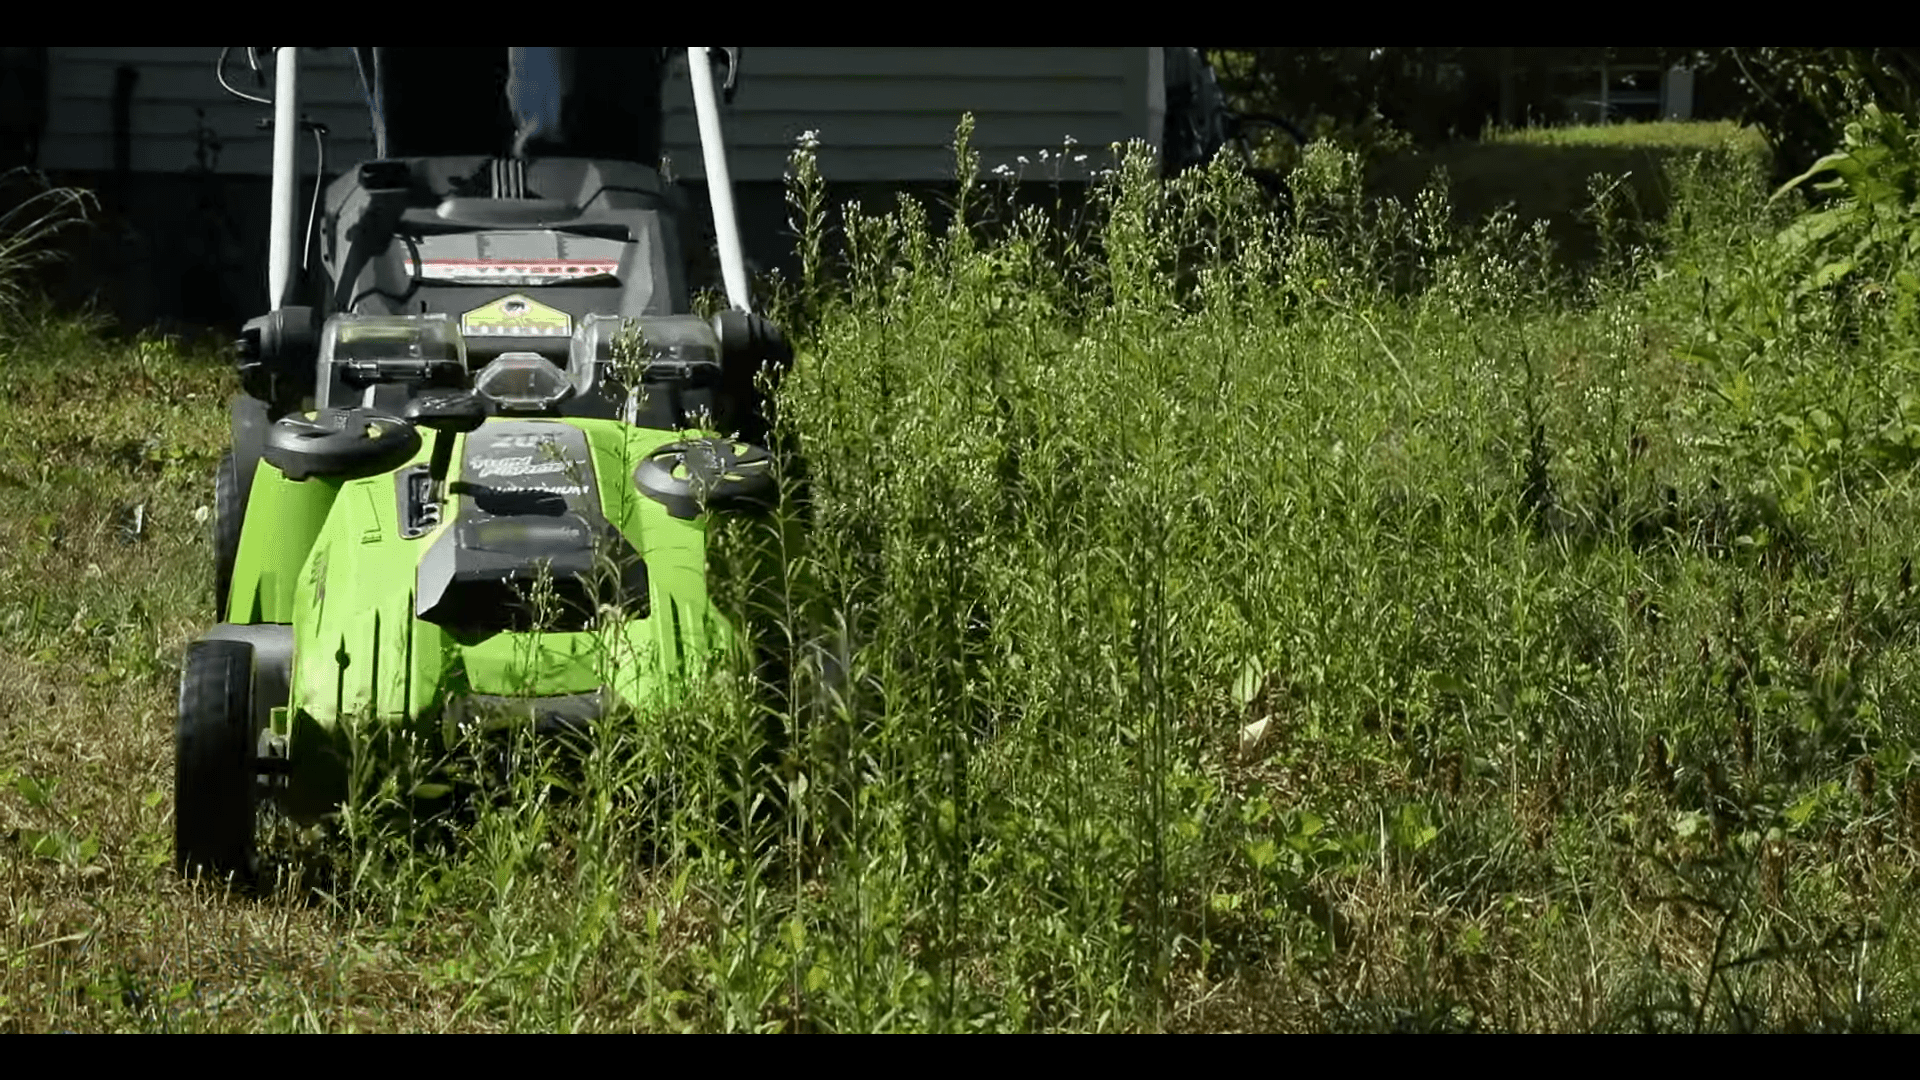 Electric lawn mowers still have impressive range despite spare battery restrictions and needing to be recharged